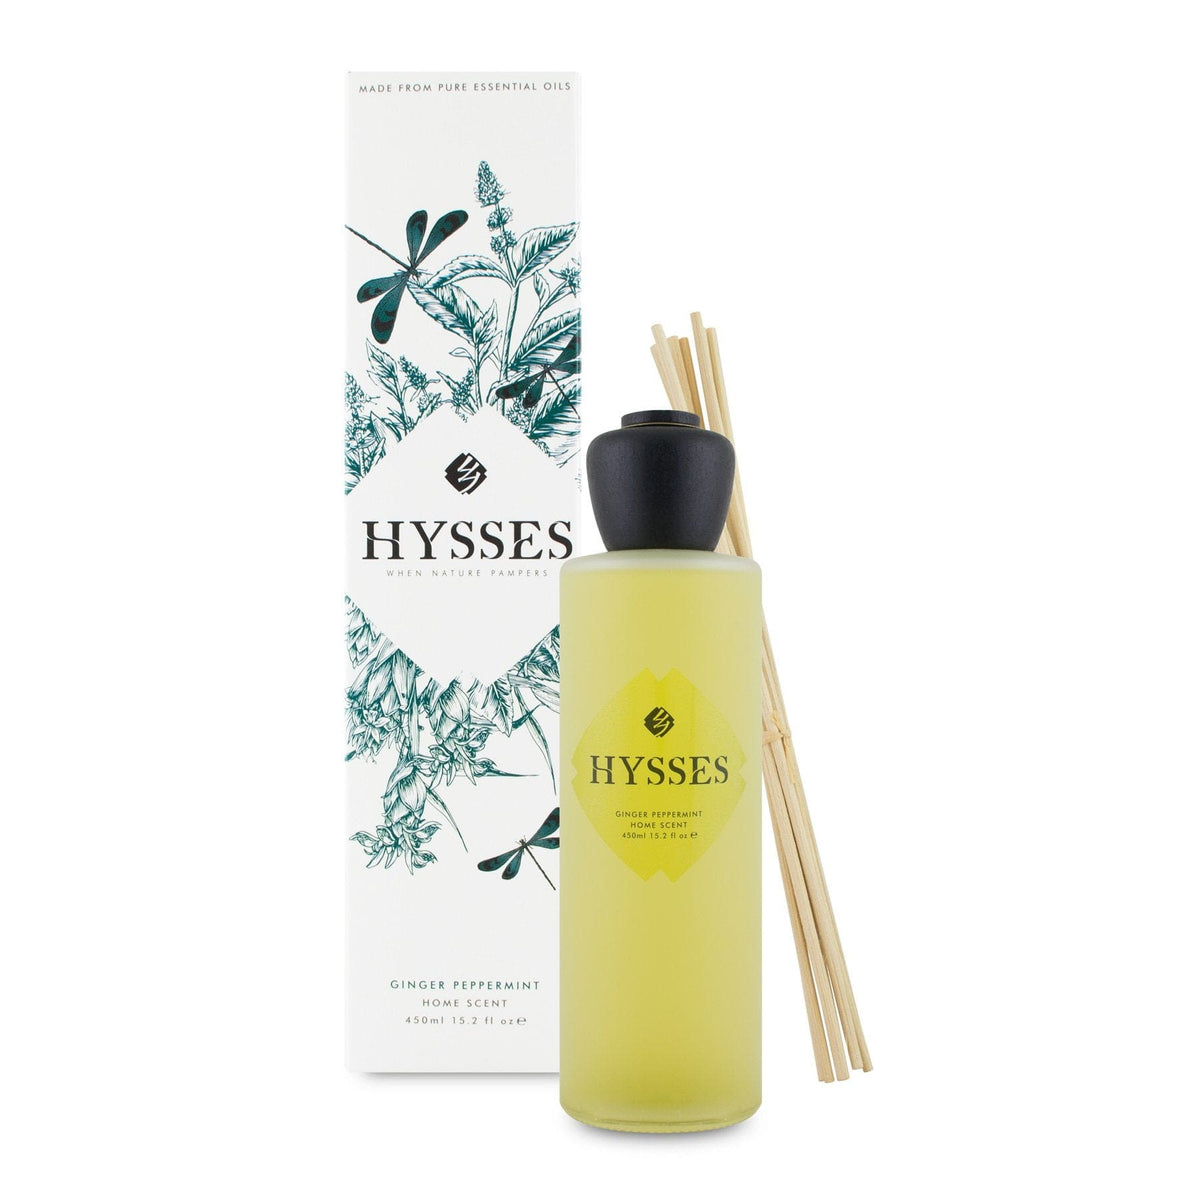 Hysses Home Scents 450ml Home Scent Reed Diffuser Ginger Peppermint